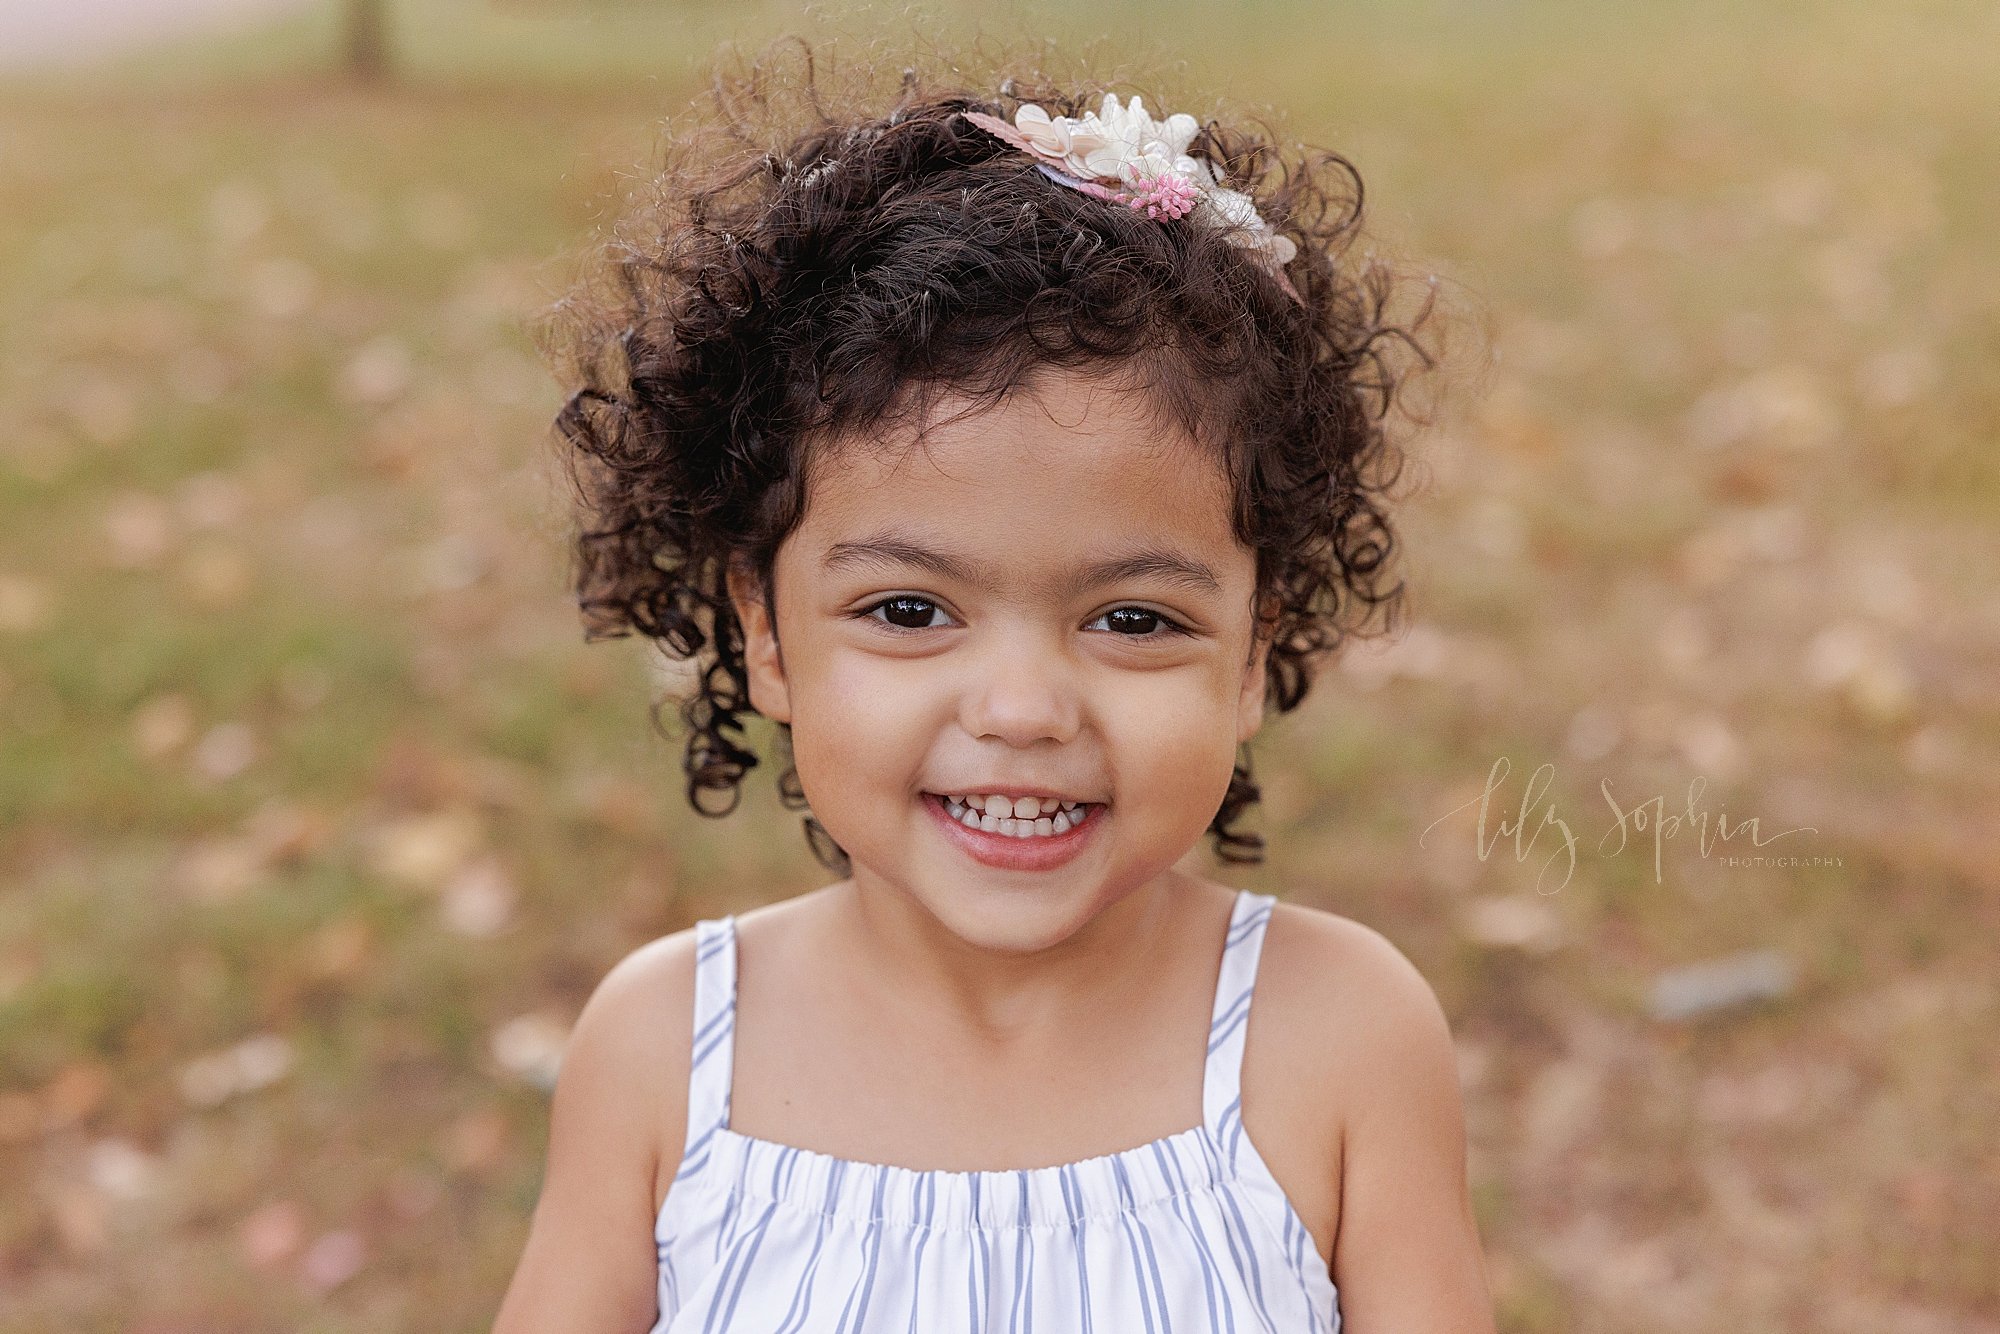  A toddler curly haired toddler girl’s portrait is taken during autumn in Atlanta park as she smiles for a family photo shoot at sunset. 